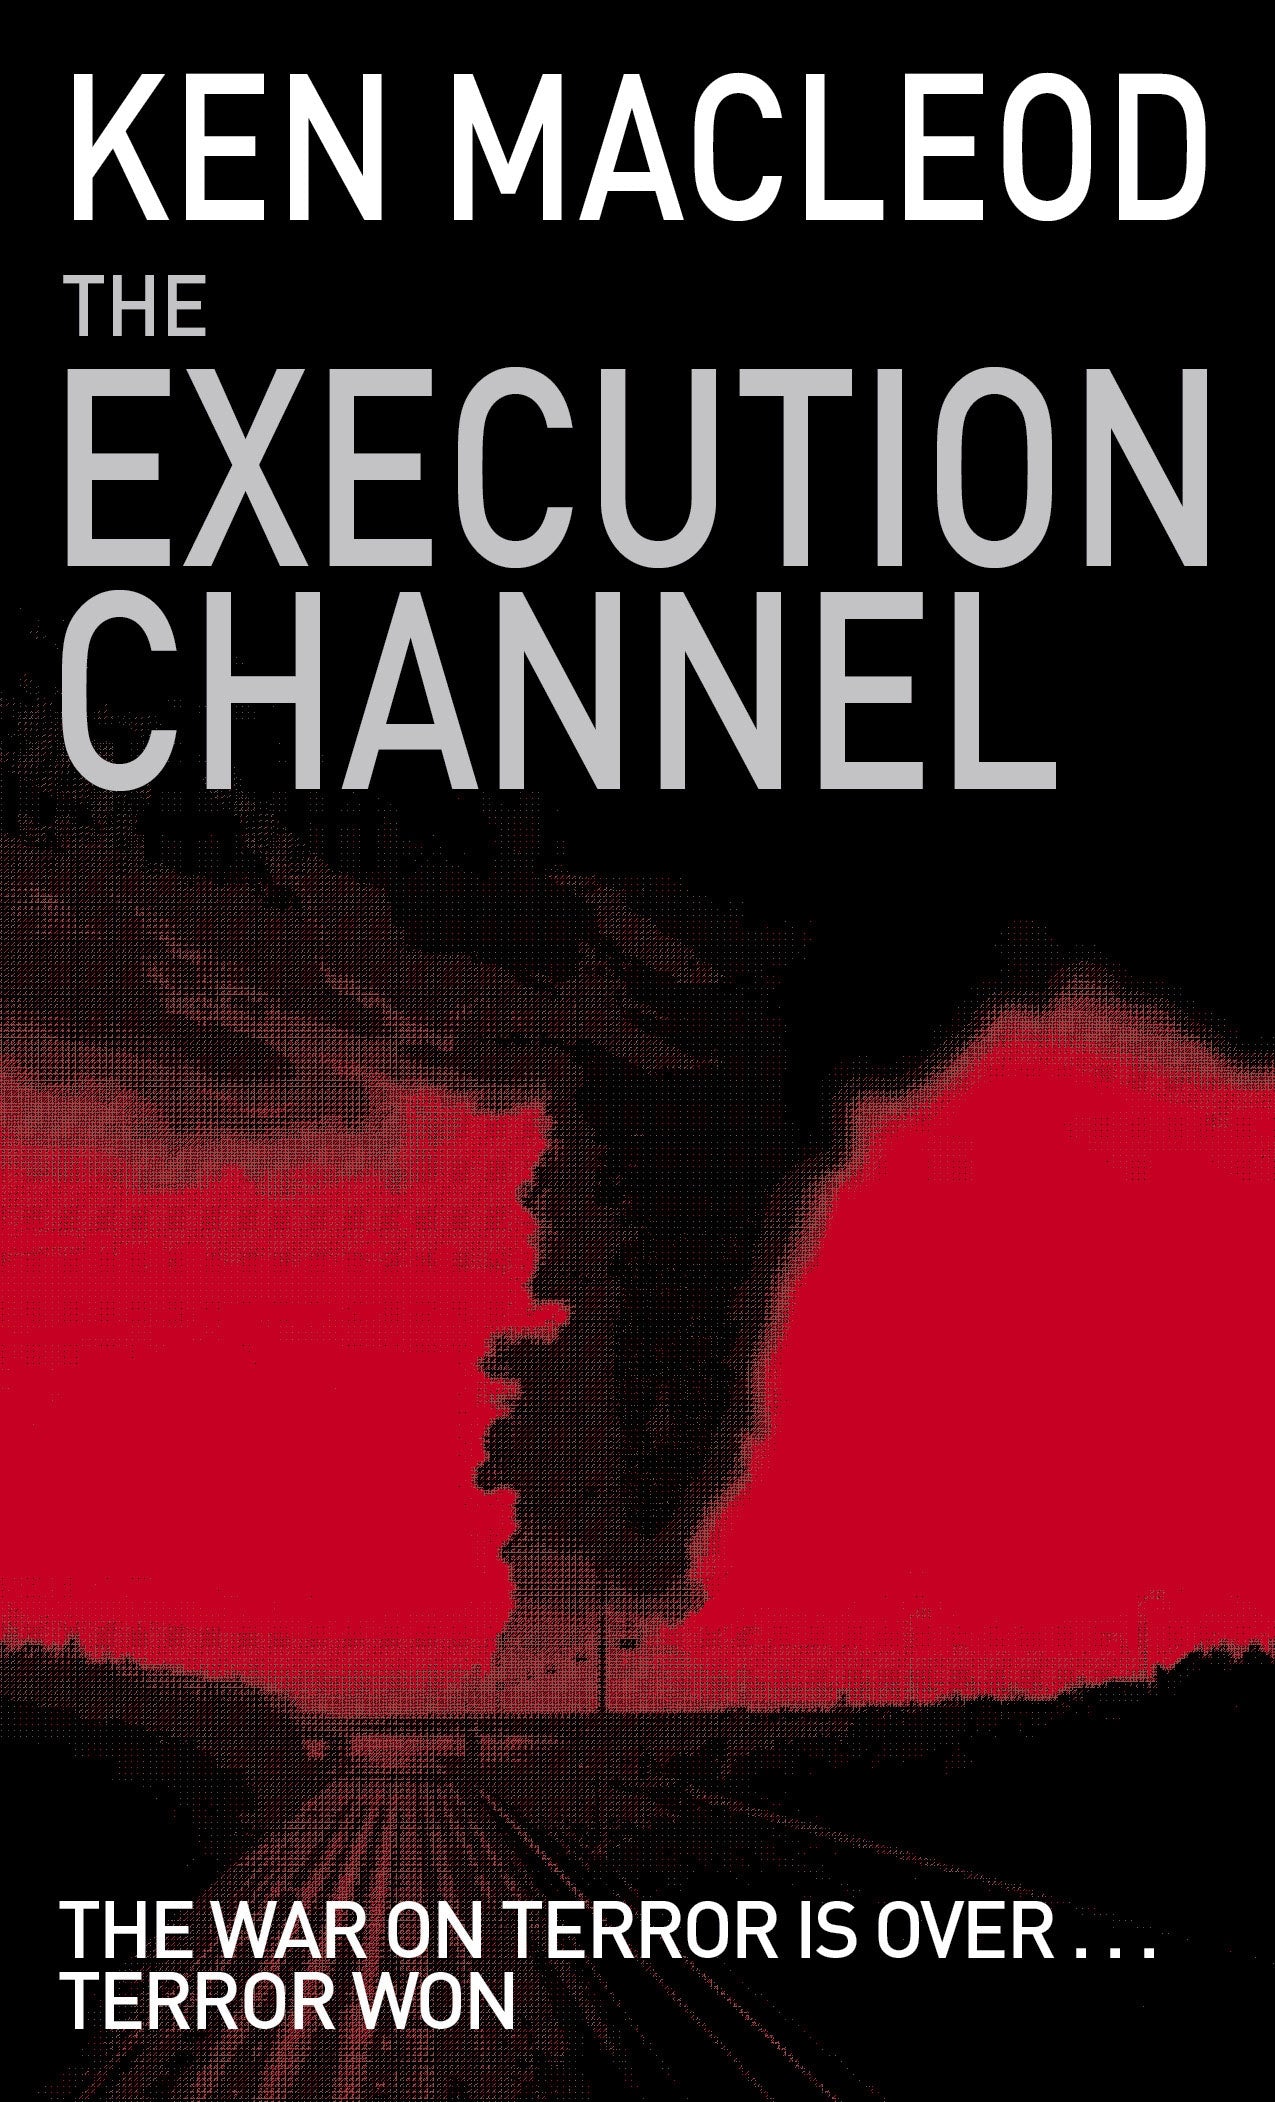 The Execution Channel by Ken MacLeod